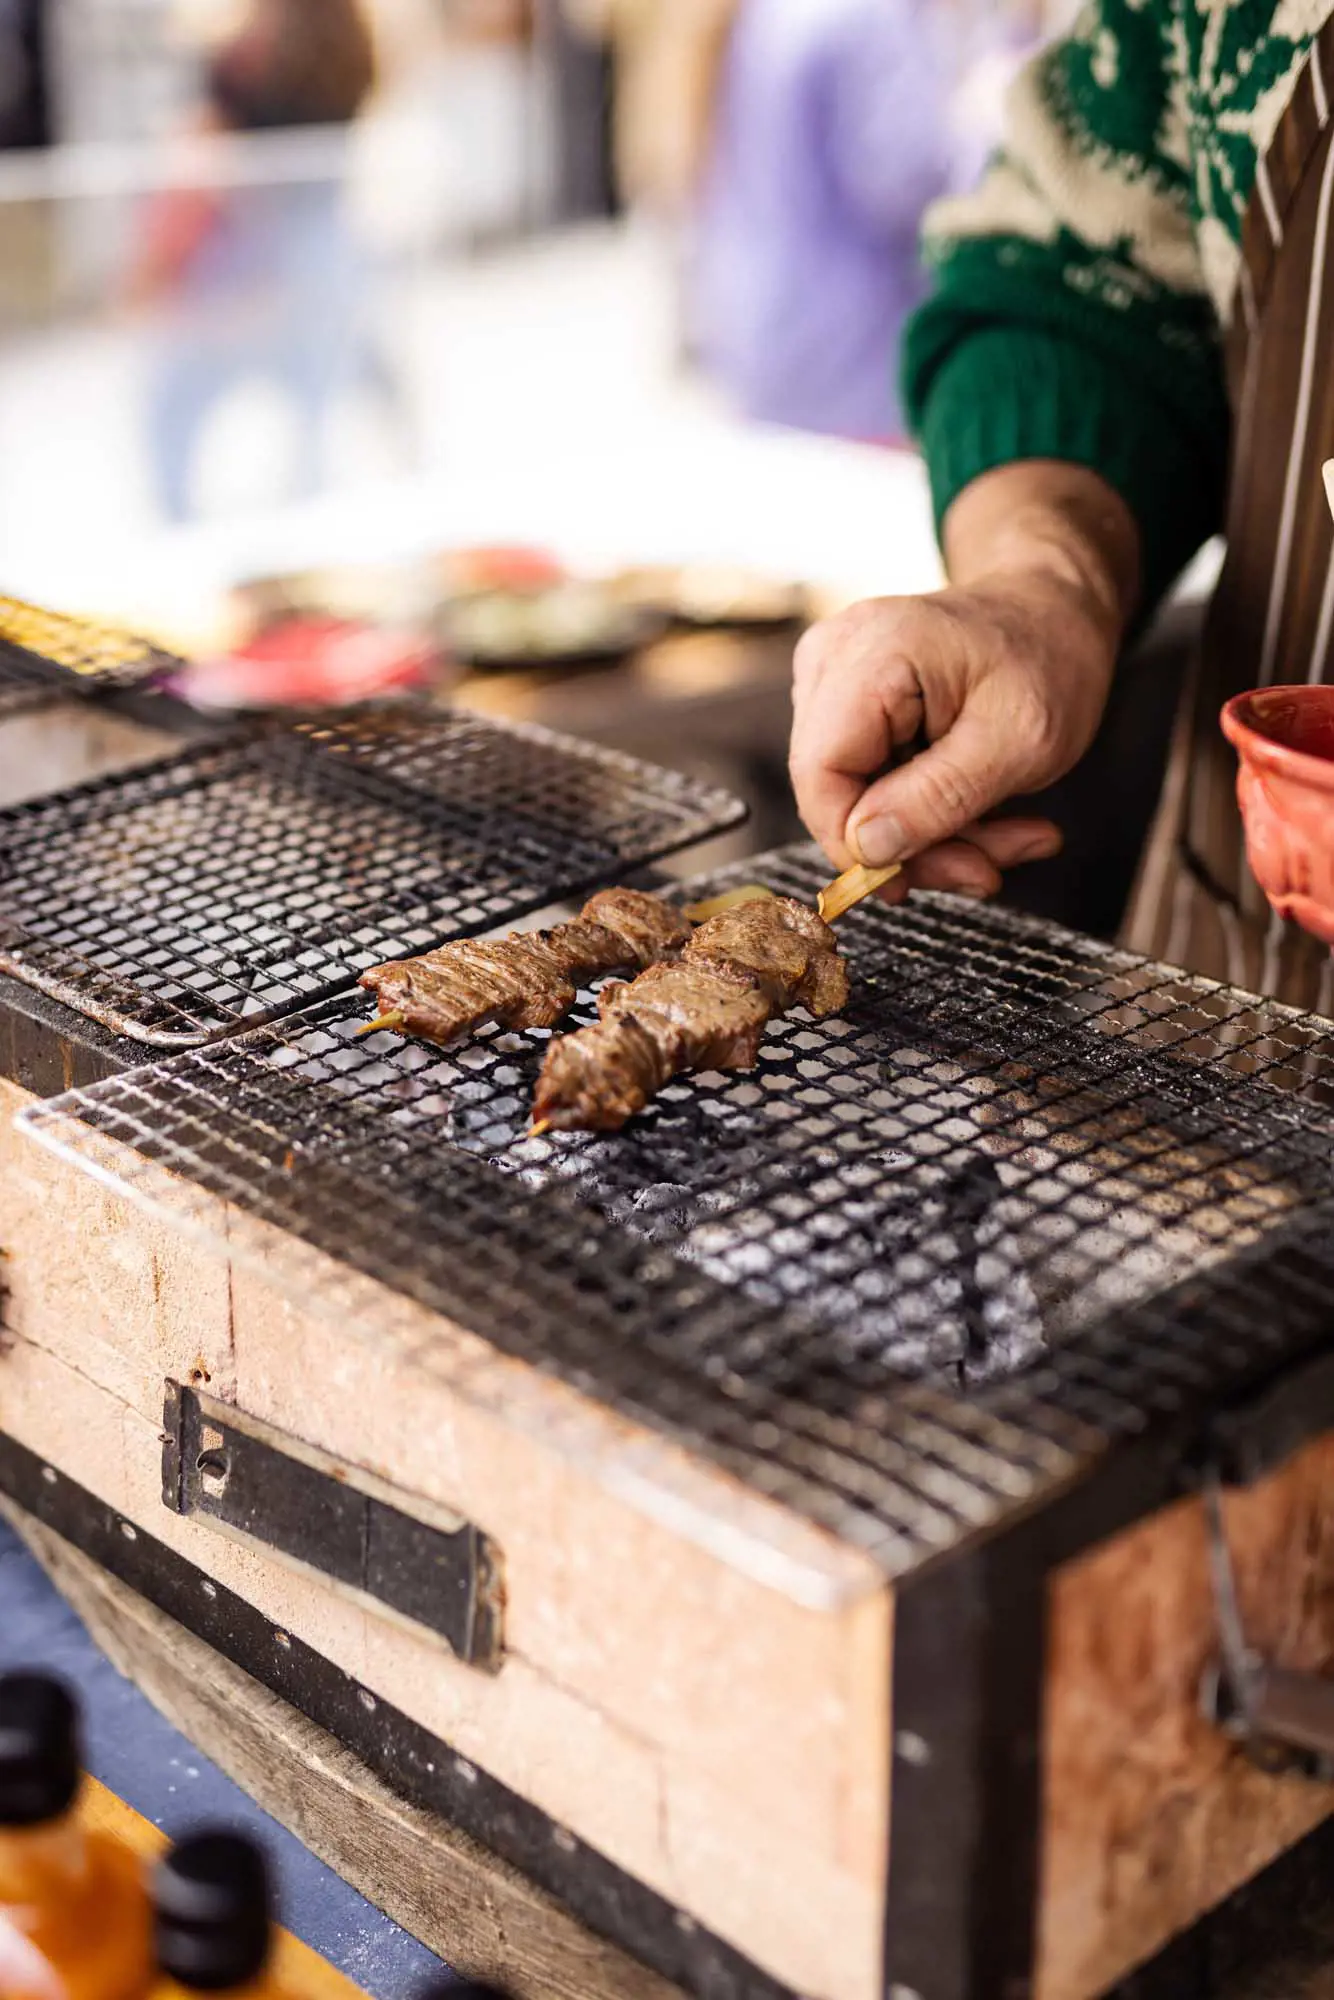 Beef on a bamboo skewer is cooked over the coals in a Japanese-style hibachi BBQ.